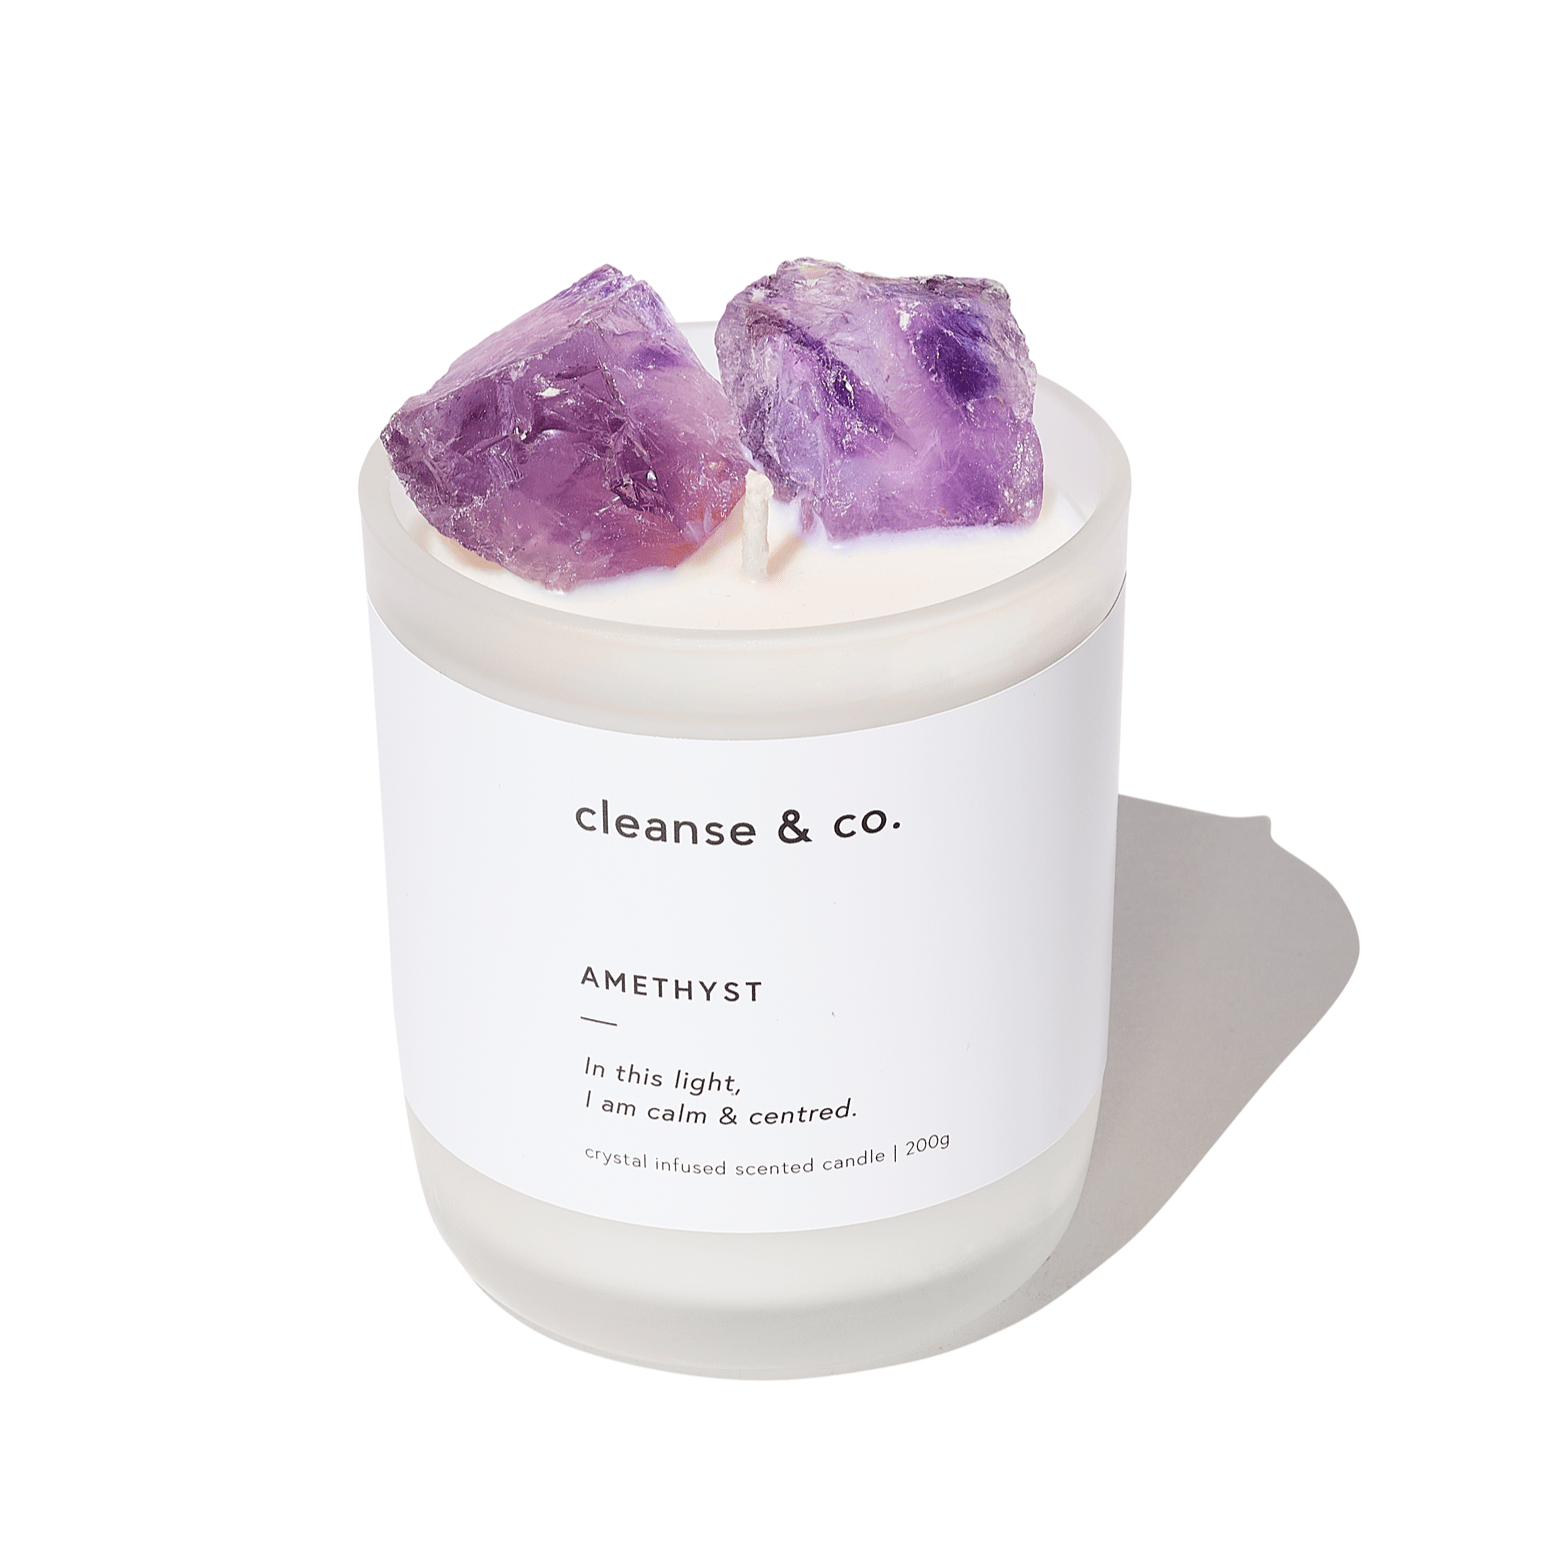 amethyst crystal candle 200g by Cleanse & co